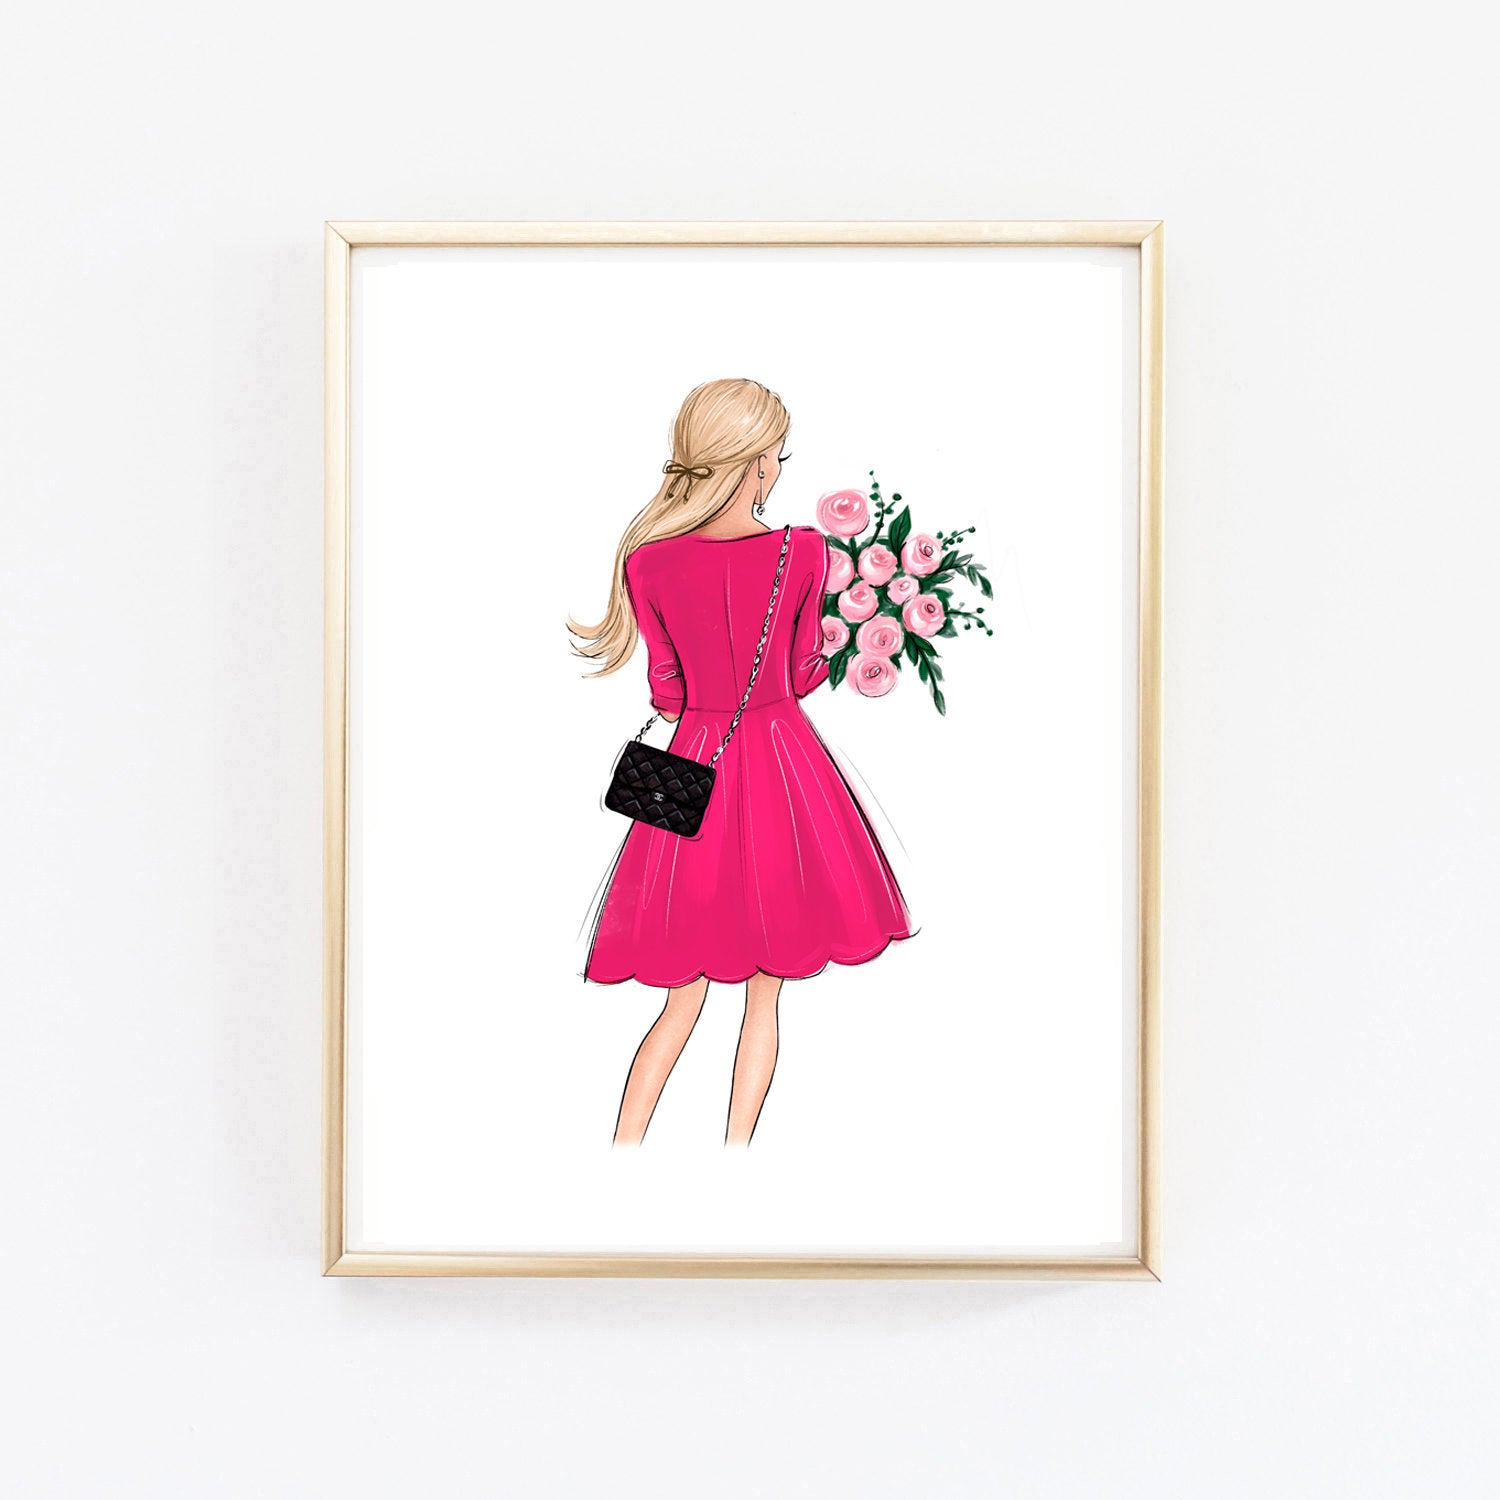 Fashion wall art of girl in pink dress holding flowers